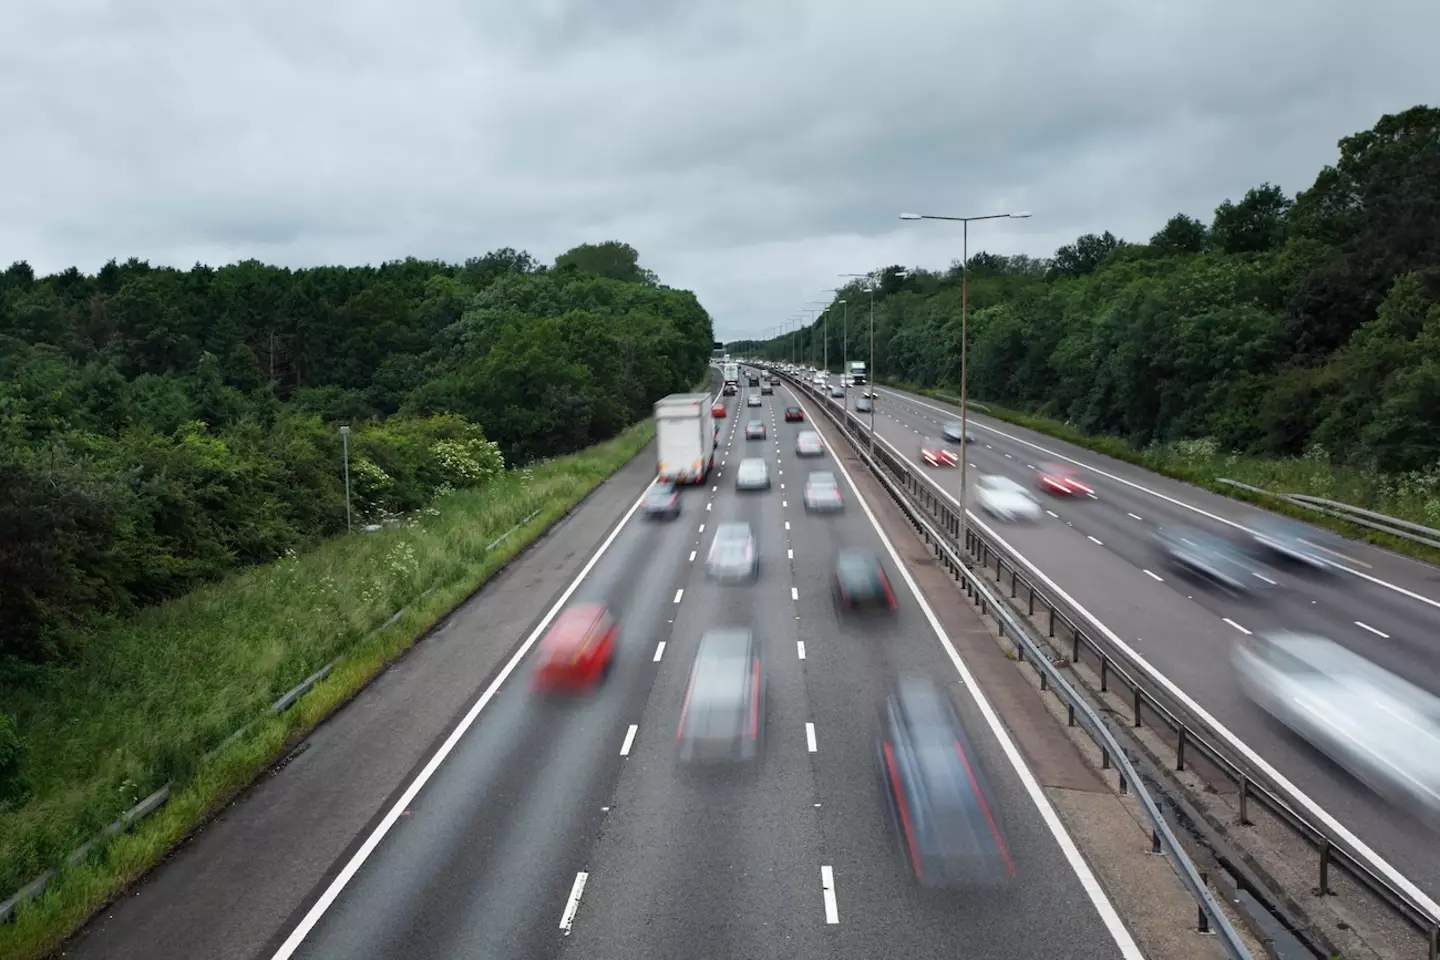 Stock image of cars on a motorway.